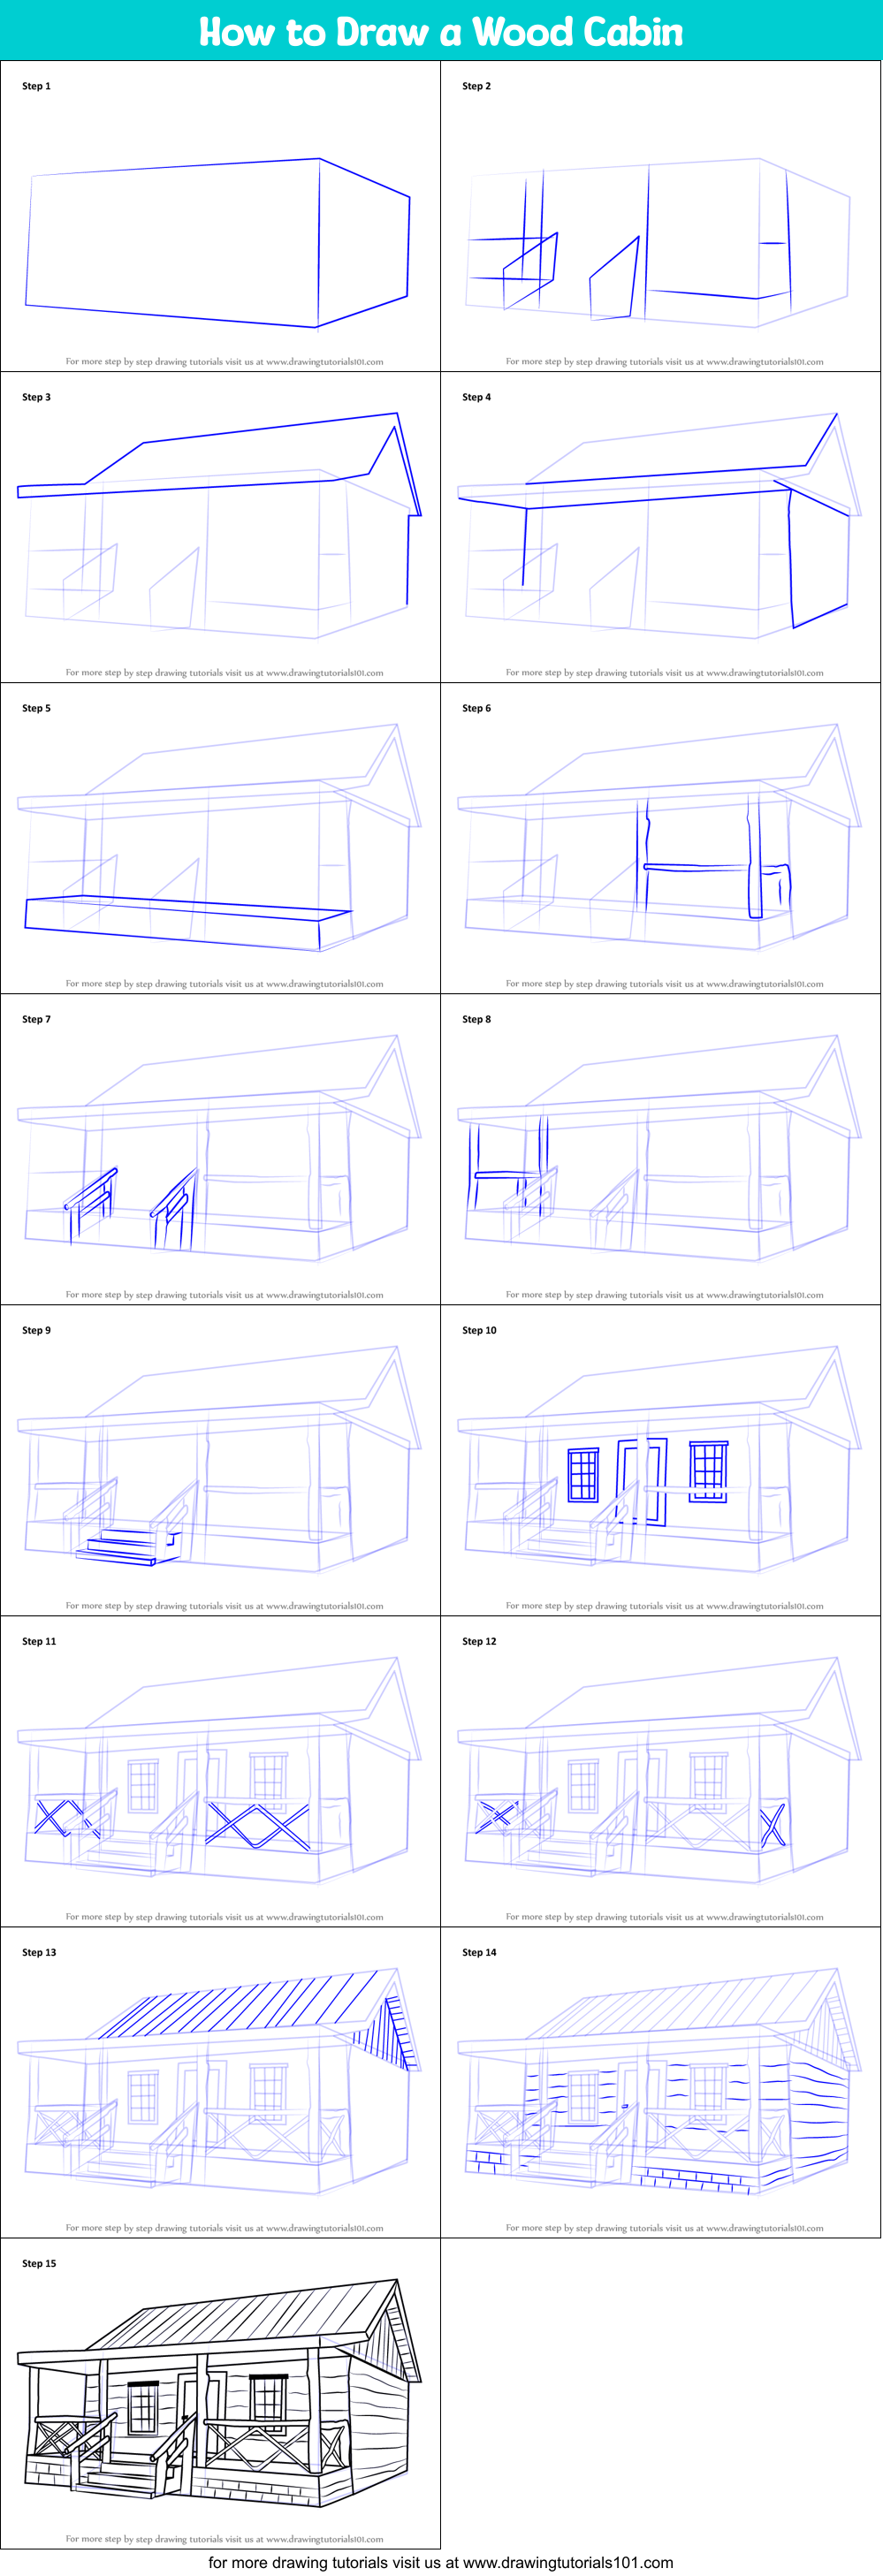 How to Draw a Wood Cabin printable step by step drawing sheet